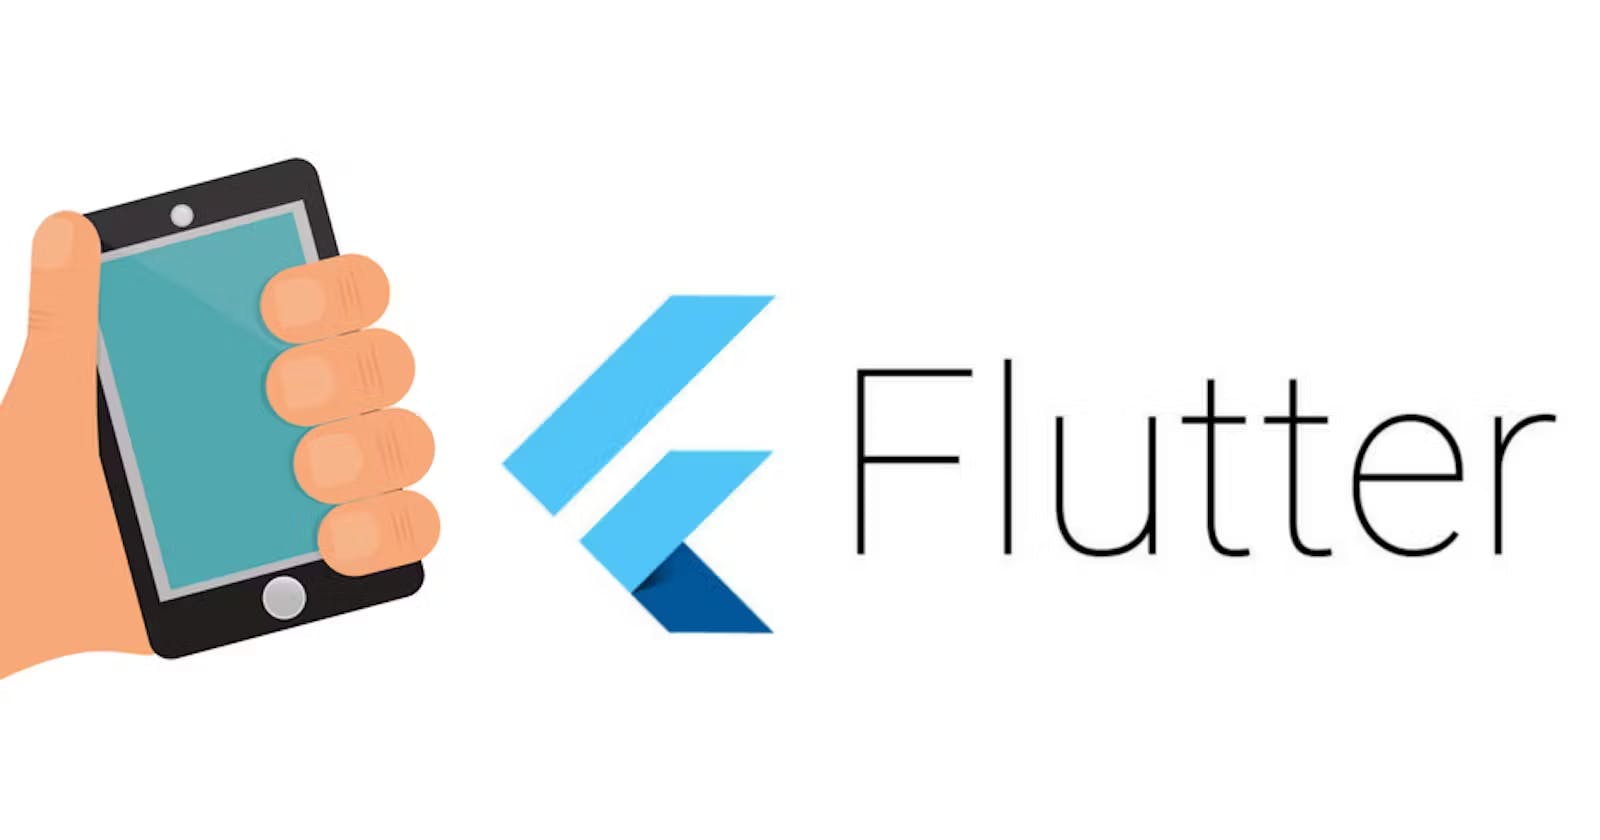 Flutter: Bridging the Gap Between iOS and Android